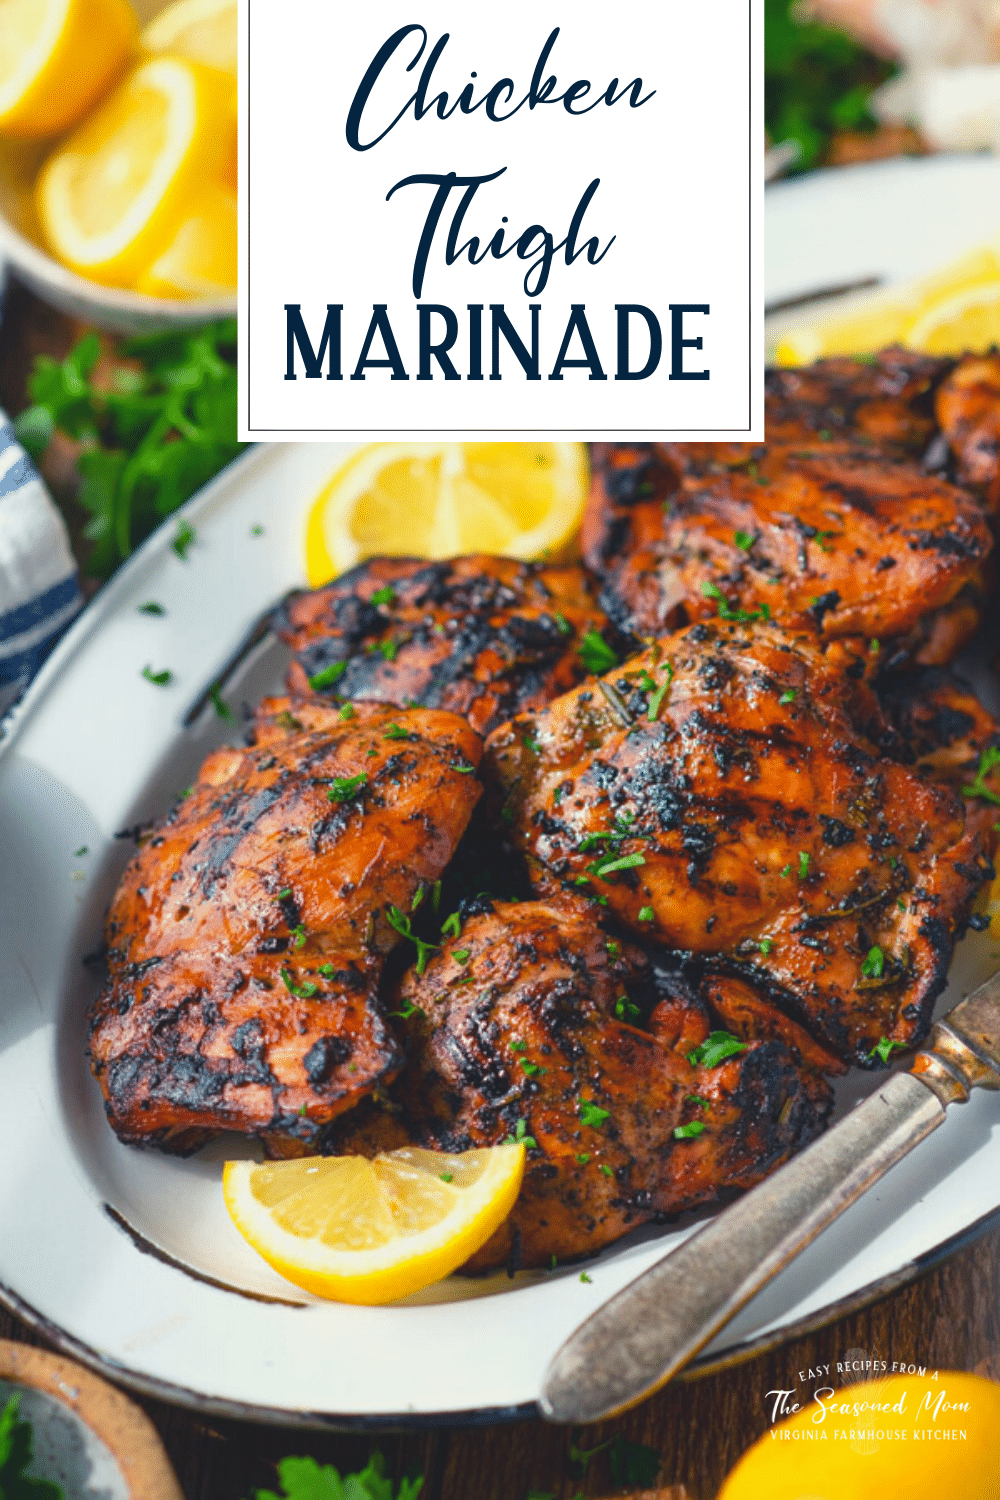 Side shot of a tray of chicken thigh marinade with text title overlay